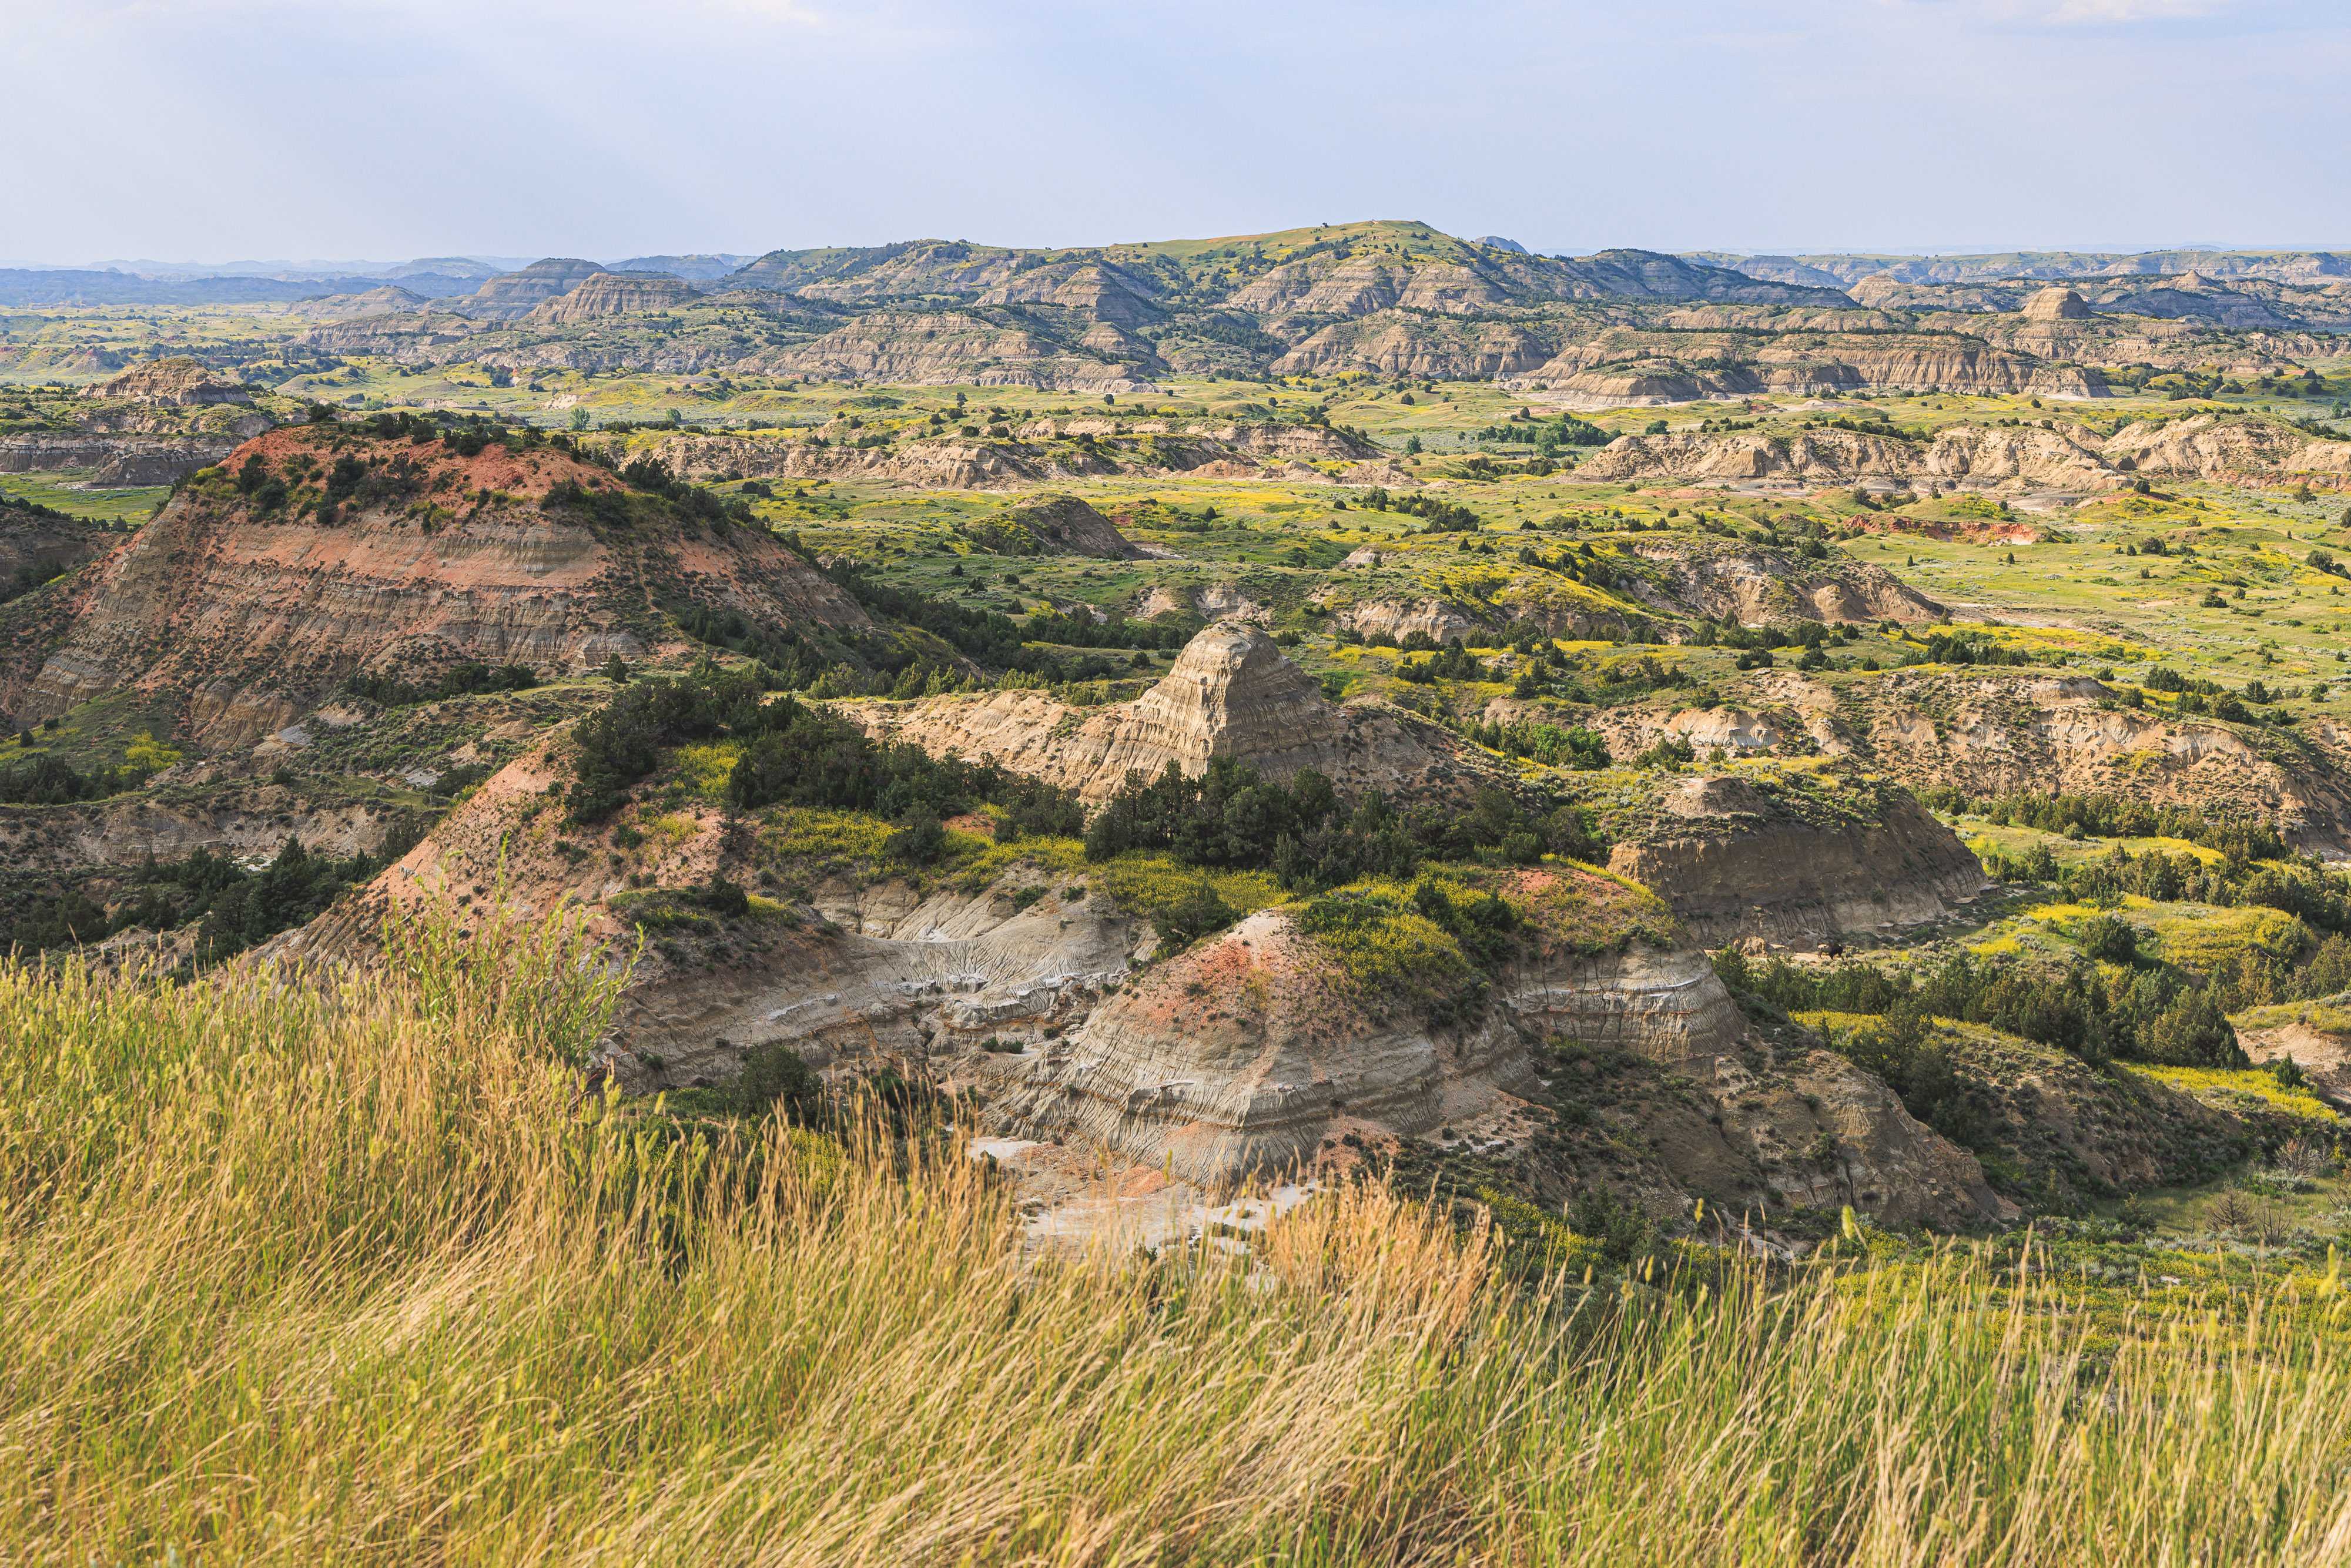 The image is the view from an overlook, showing a shallow bowl-shaped canyon filled with verdant green tall grasses and shrubs, which is strewn with rock formations that roll up from the land almost like sand dunes. .